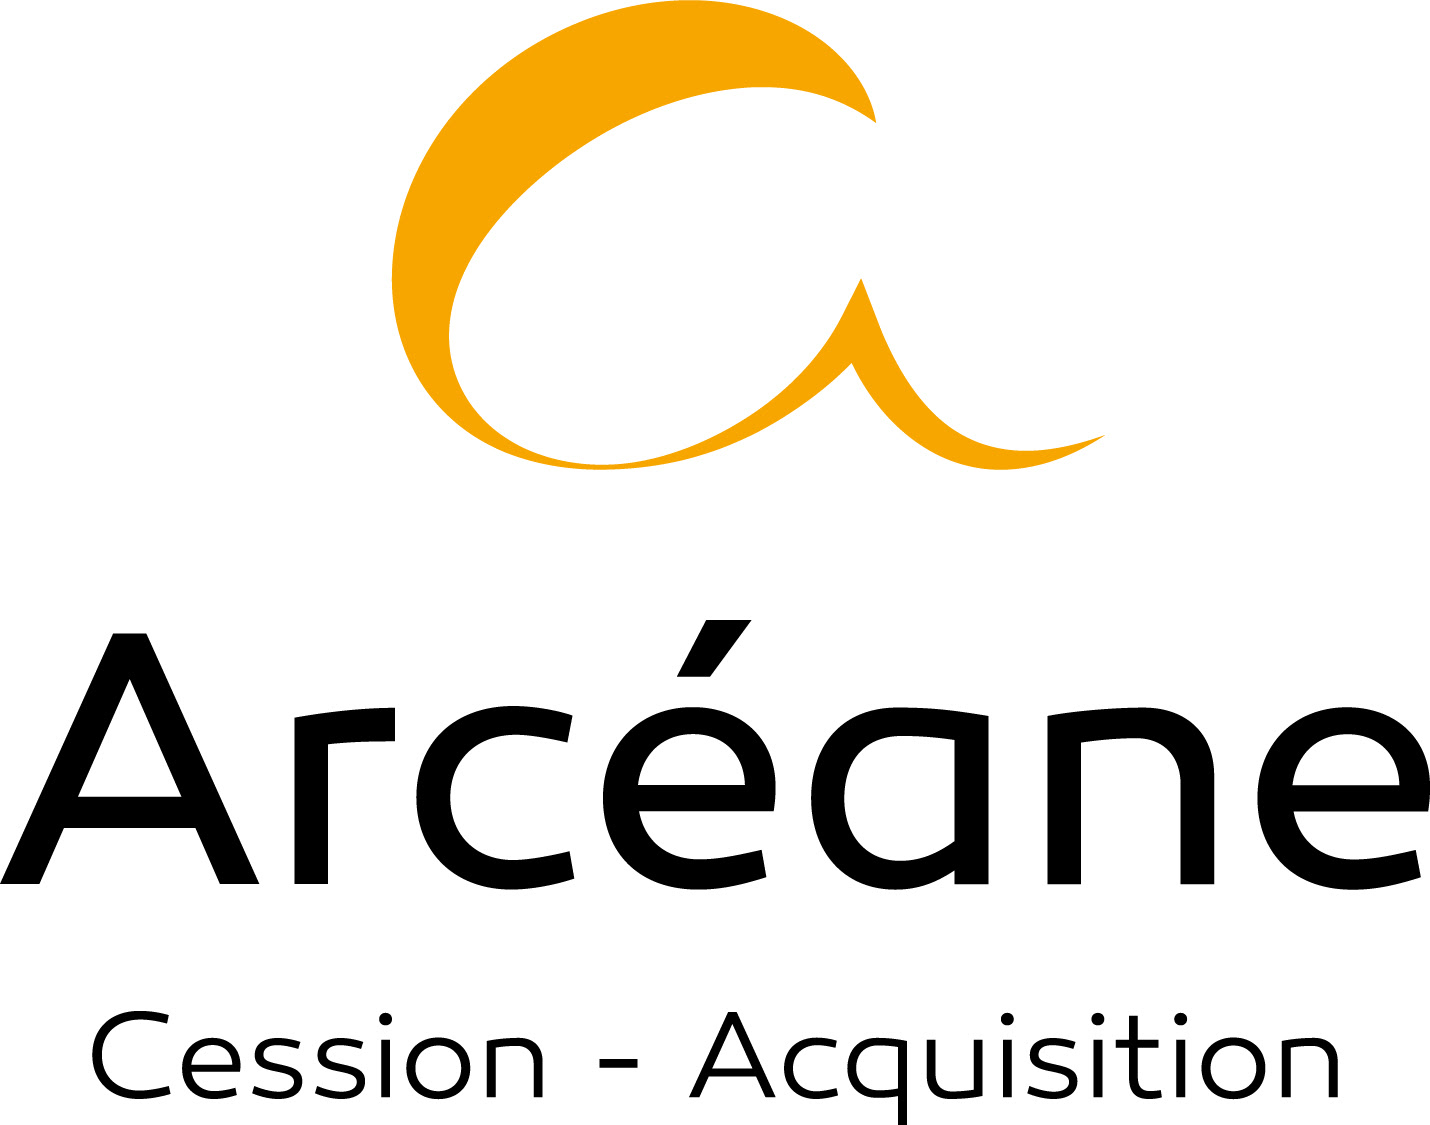 Welcome to Arcéane, our new member firm from France